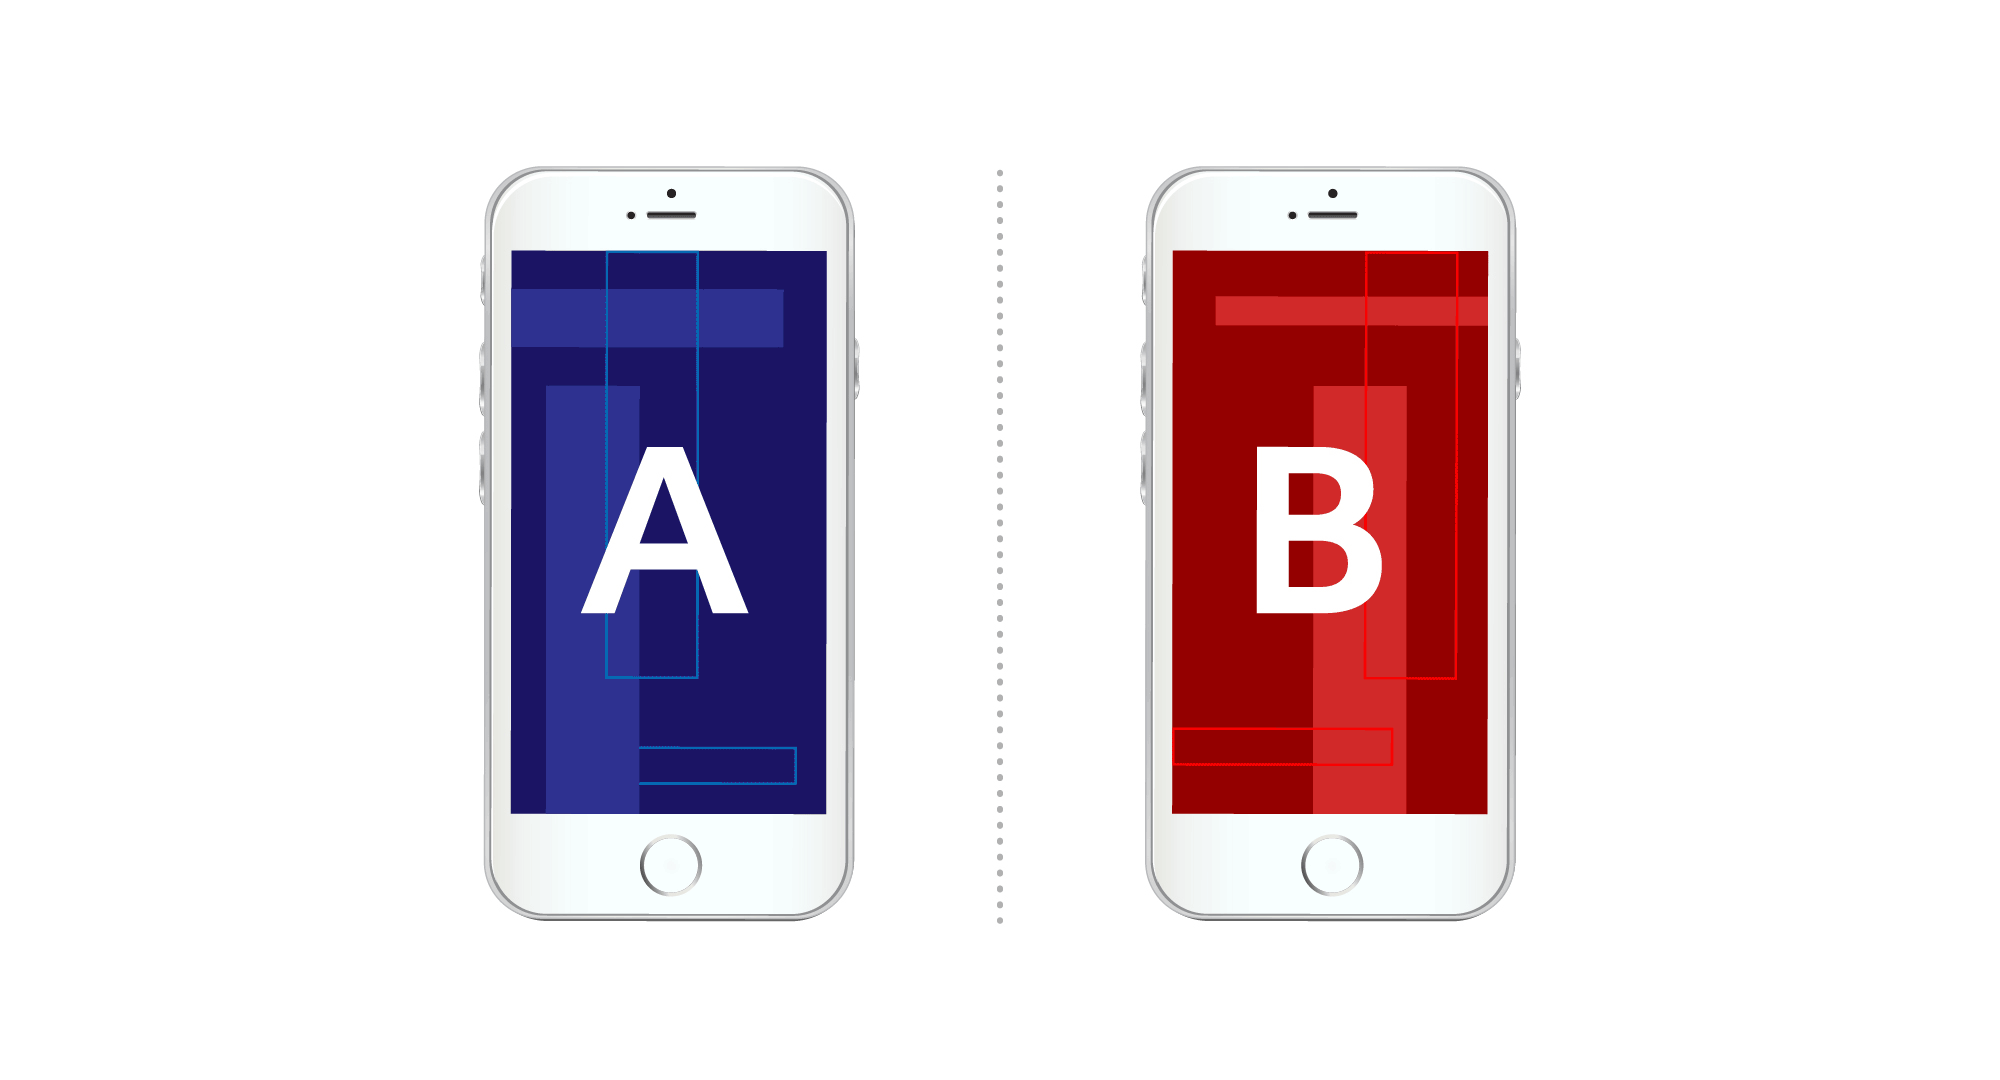 A/B testing allows you to eliminate and improve ineffective content.